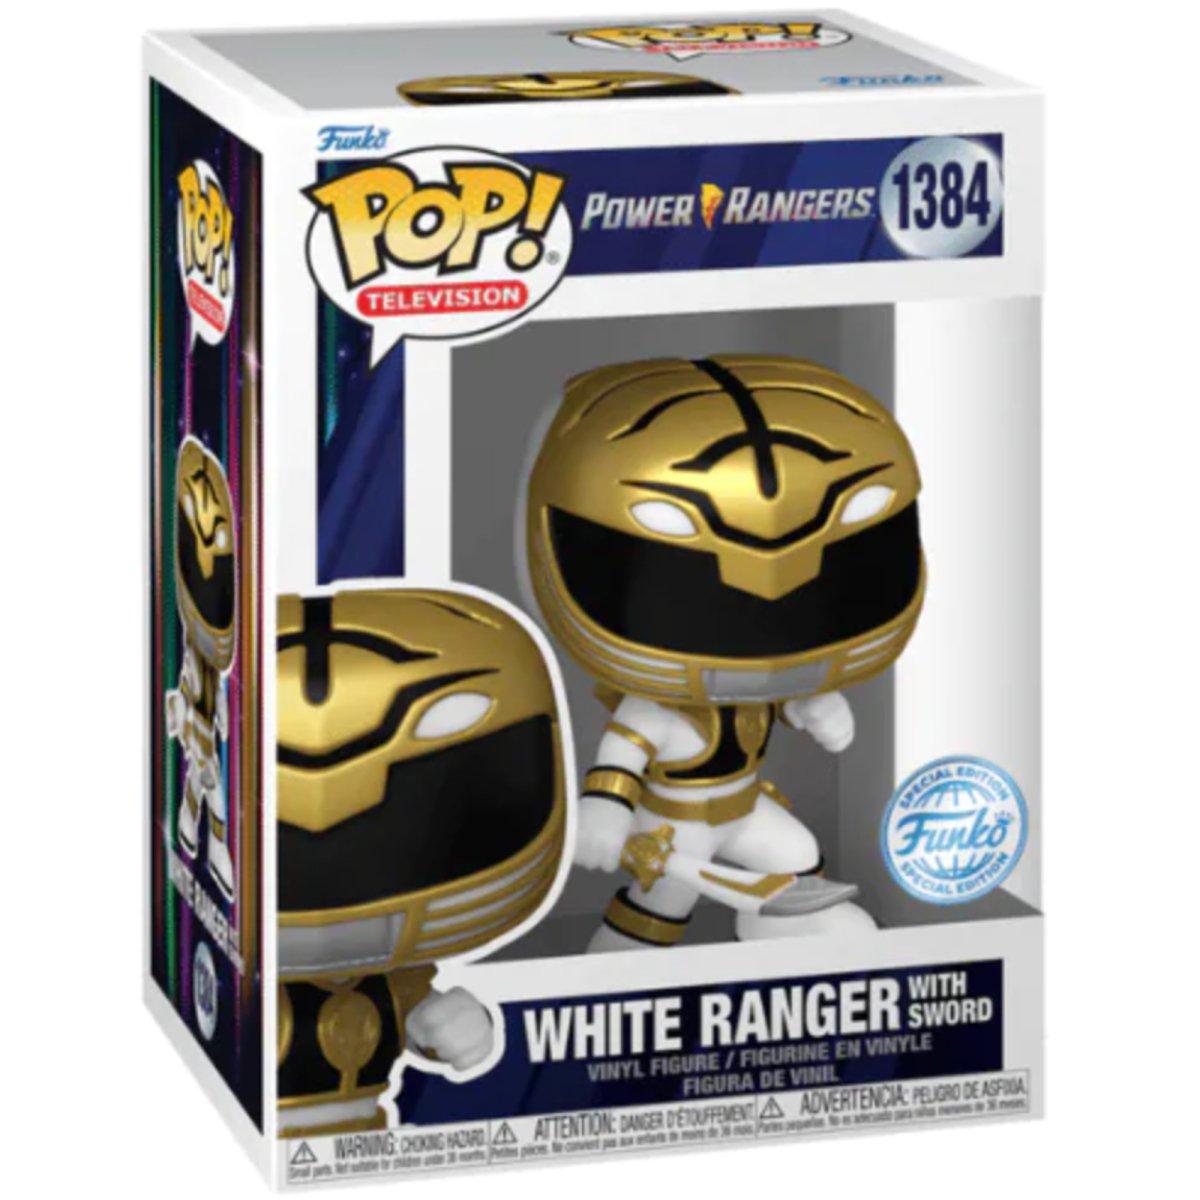 Power Rangers - White Ranger with Sword (Special Edition) #1384 - Funko Pop! Vinyl Television - Persona Toys